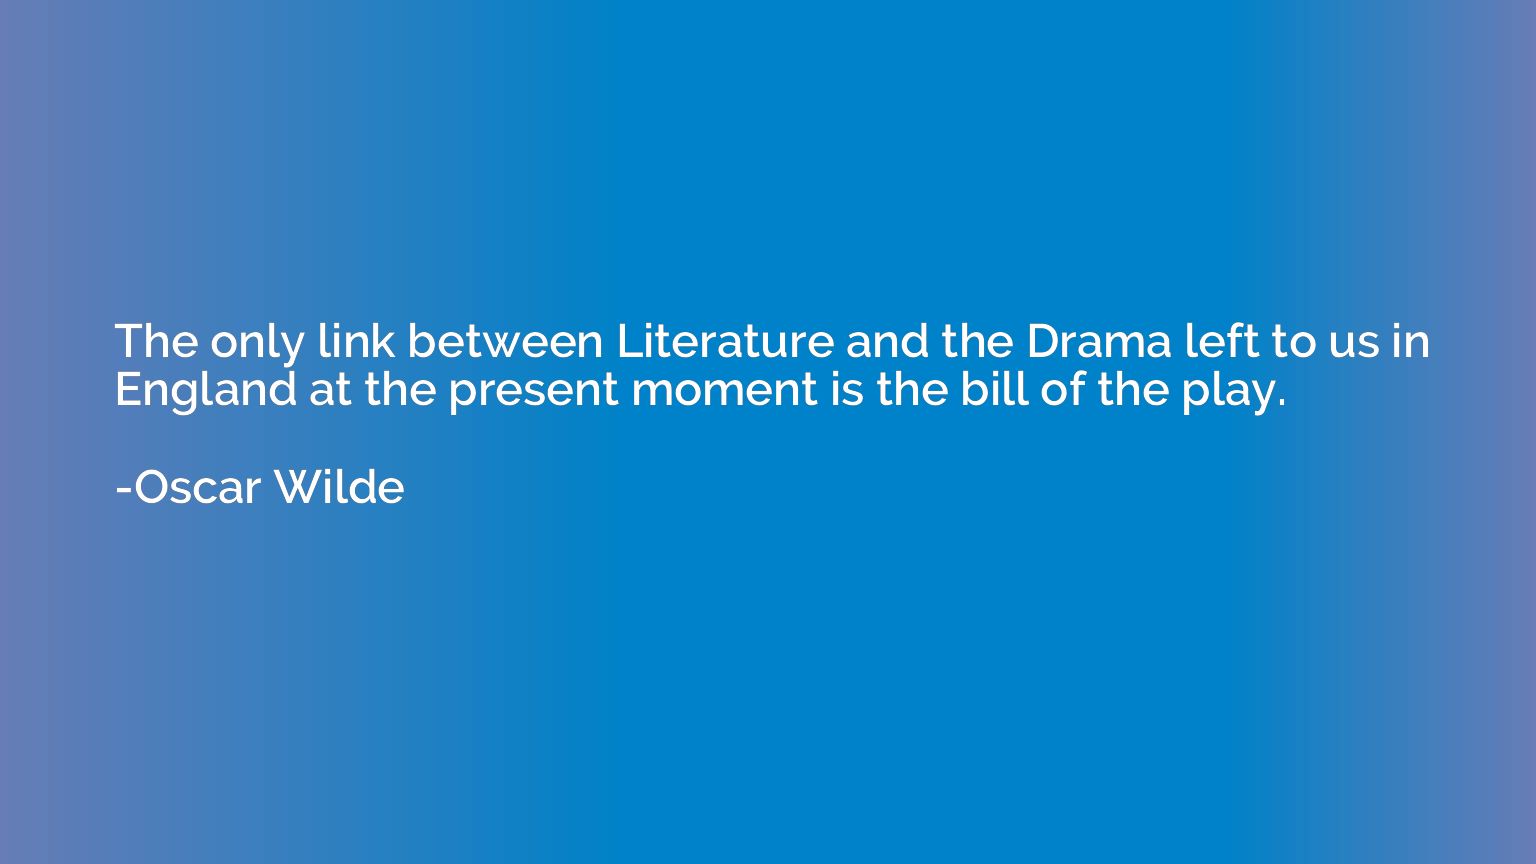 The only link between Literature and the Drama left to us in